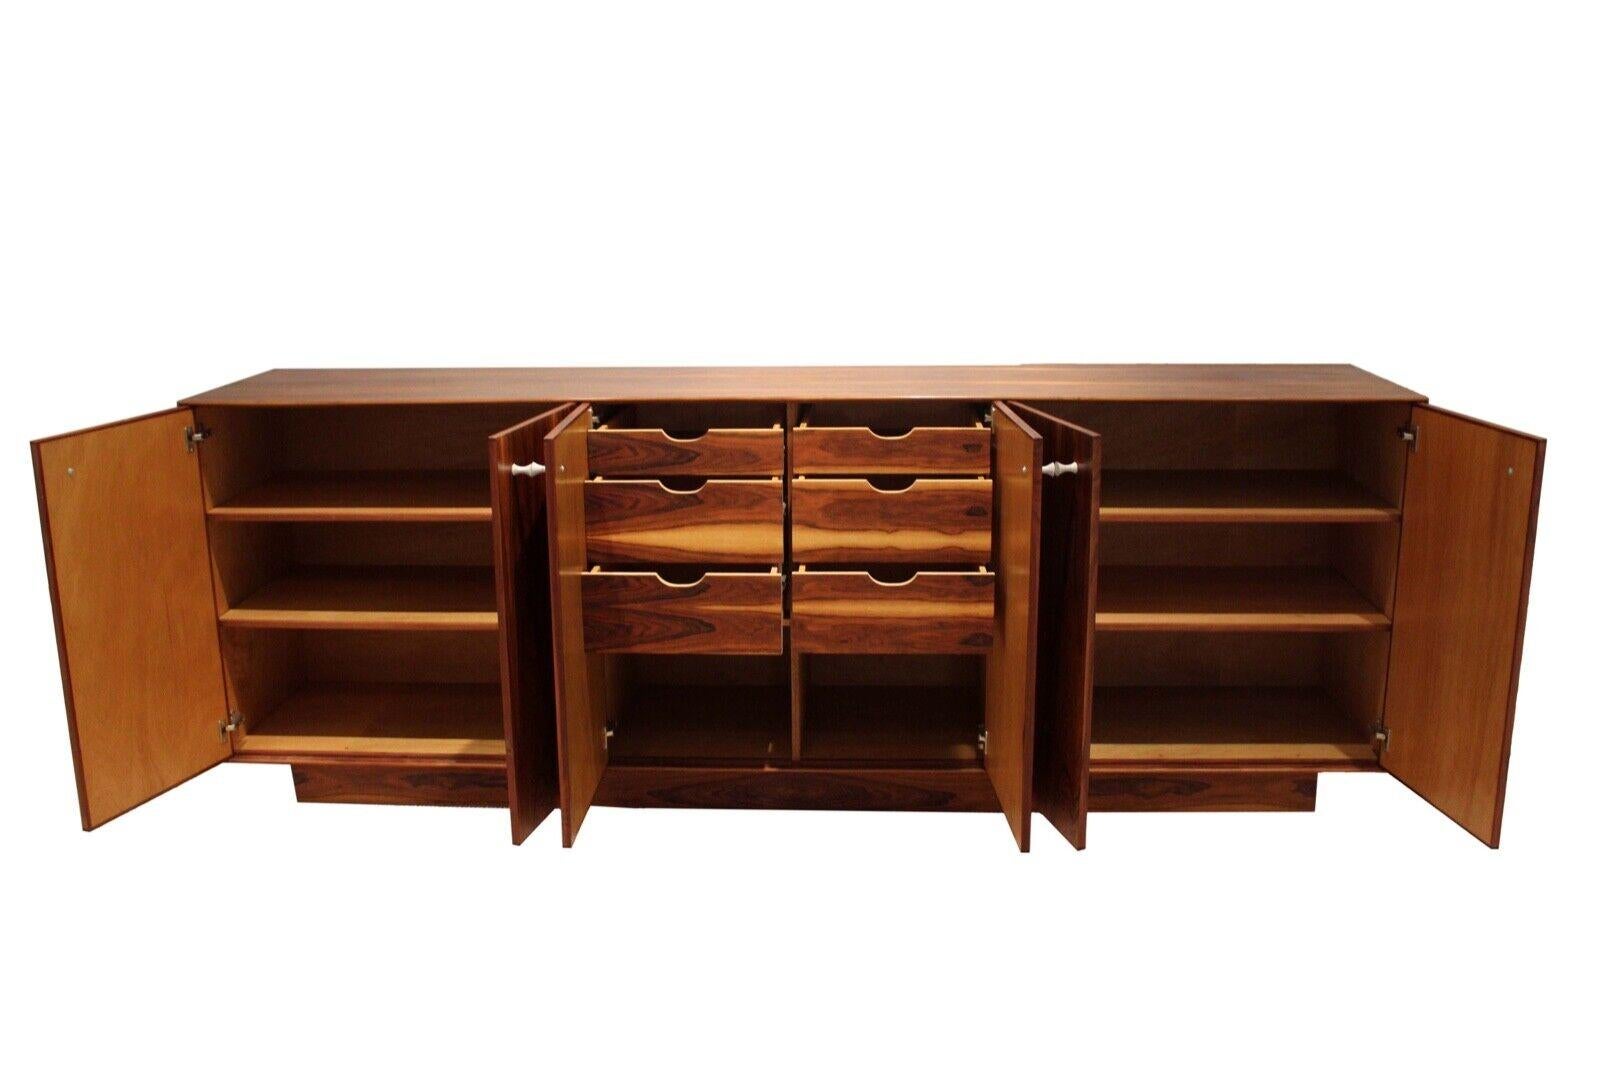 20th Century Mid-Century Modern Rosewood Thin Edge Credenza in the Style of George Nelson